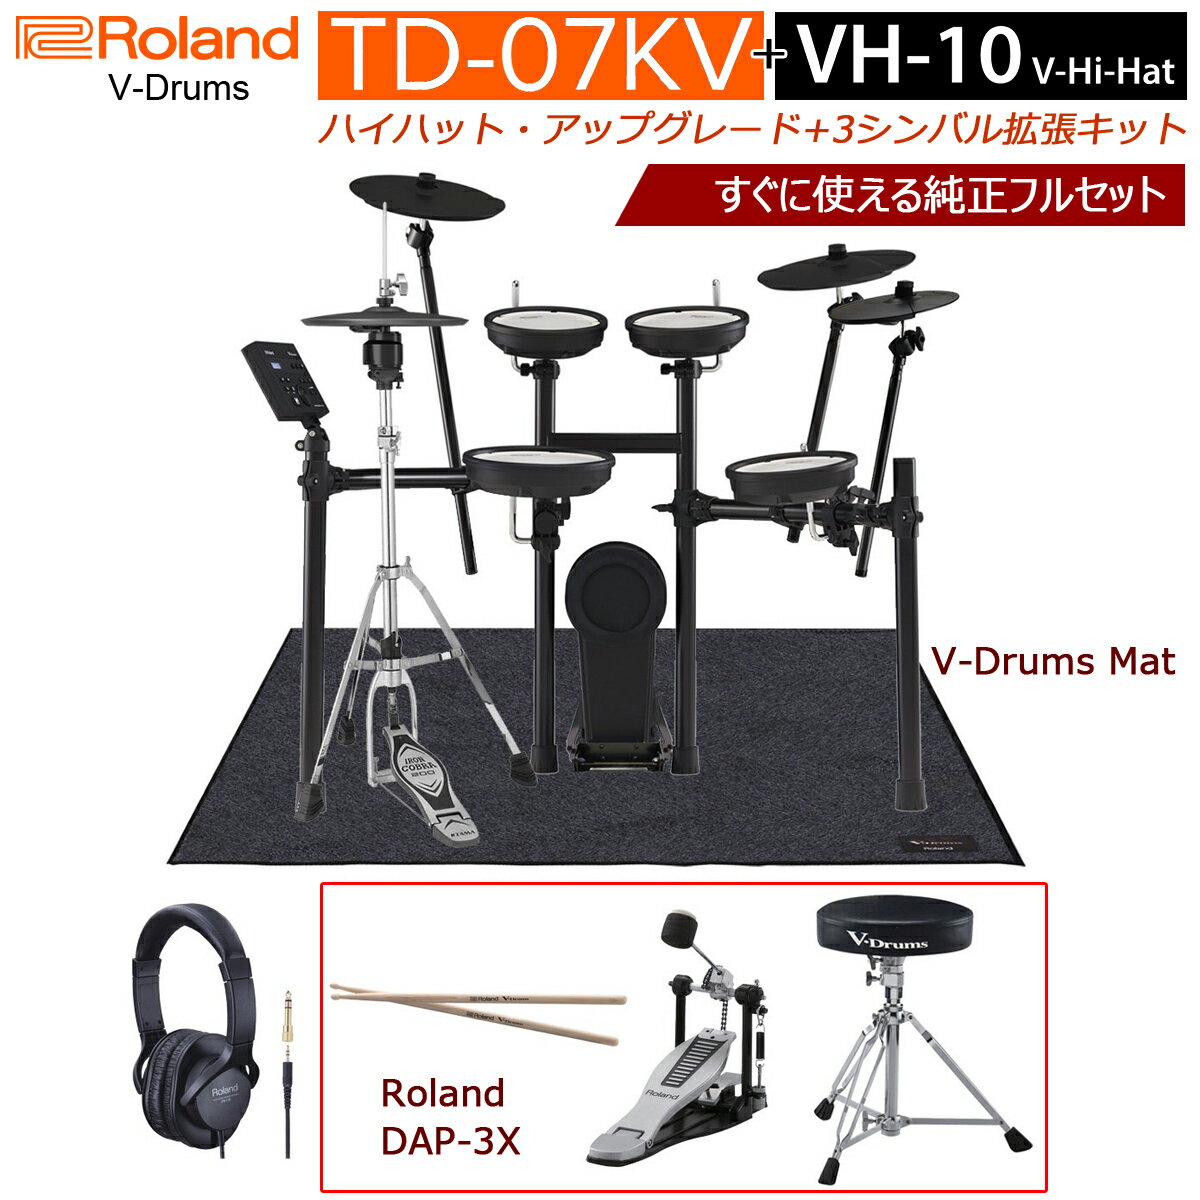 ATV aDrums artist 13 Snare Drum [aD-S13] 【お取り寄せ品】